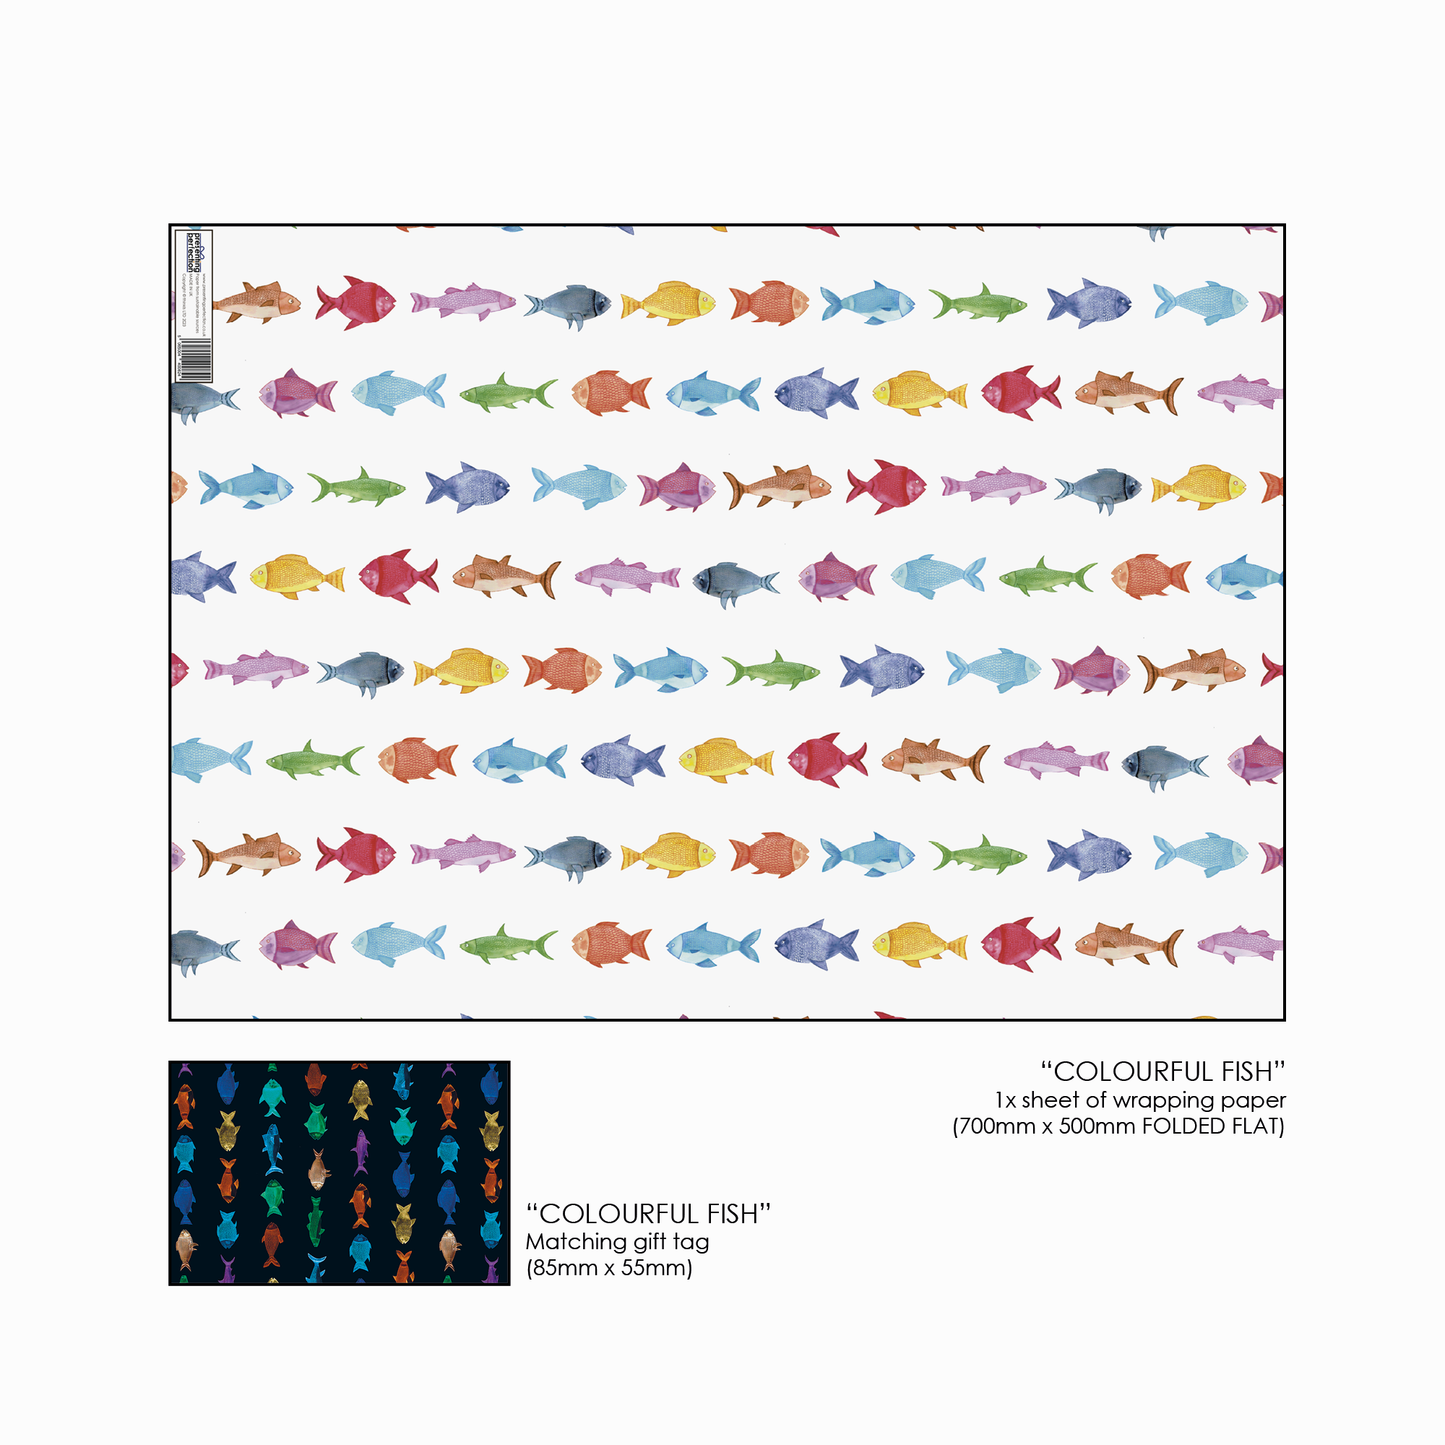 Fun Coloured Fish Wrapping Paper and Matching Fish Gift Tag